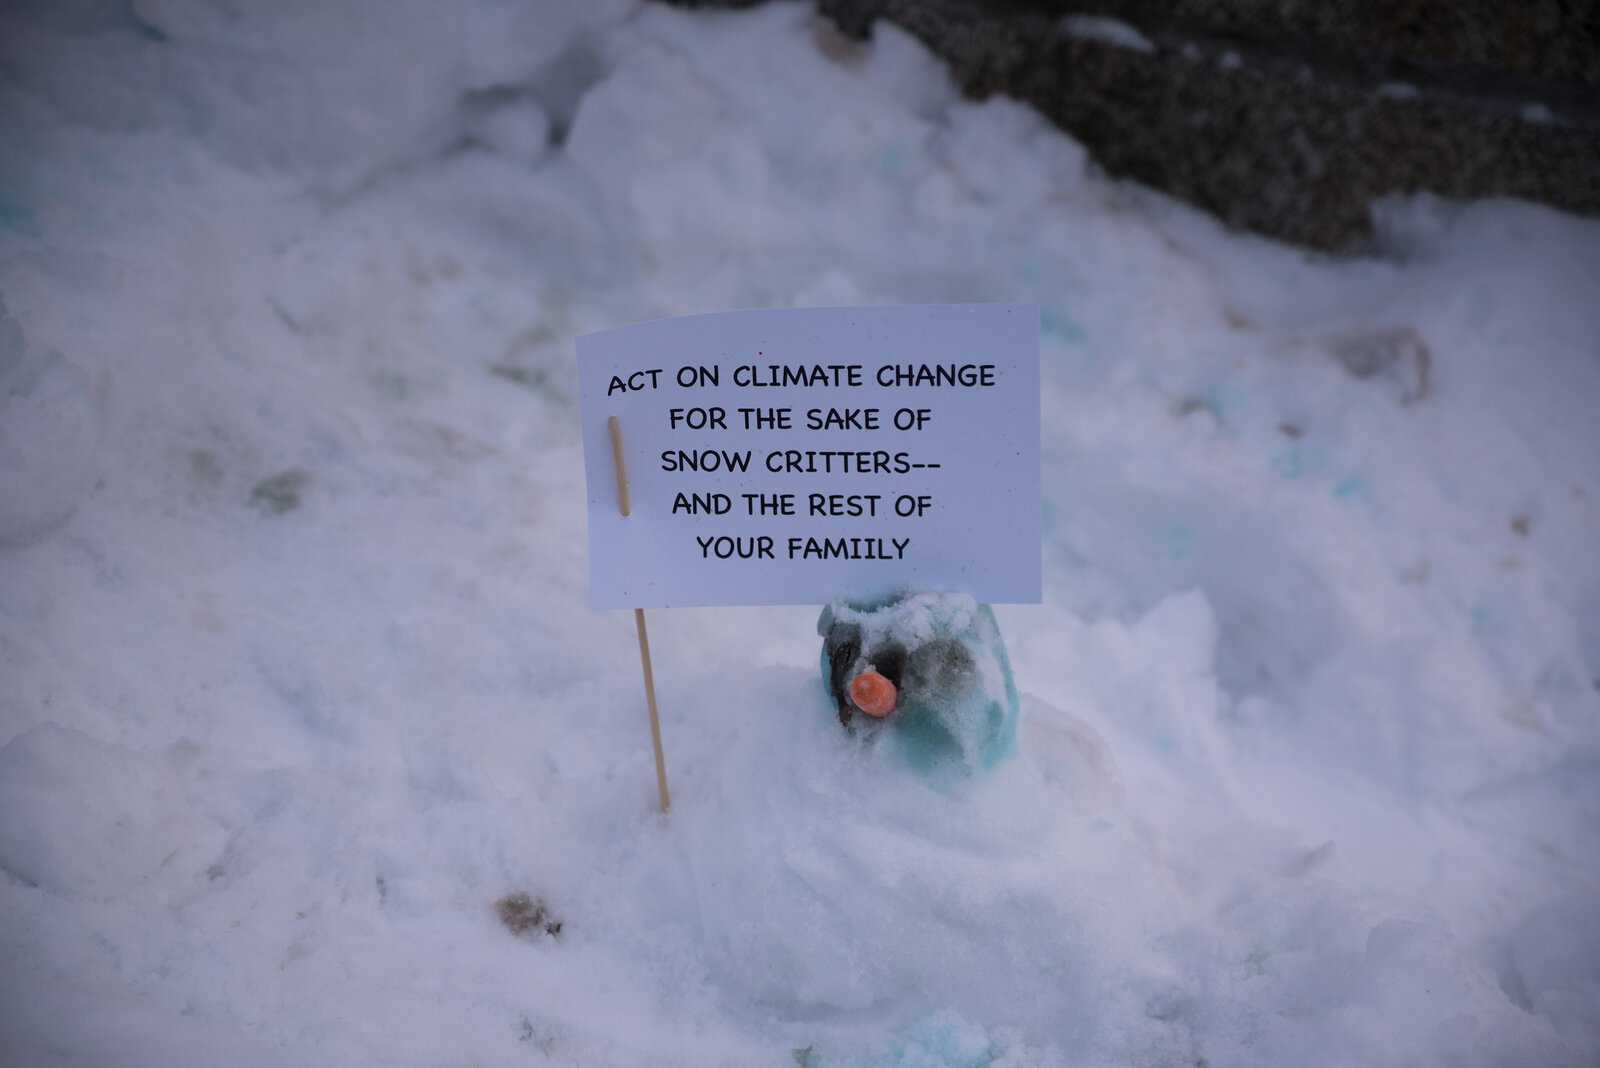 Activists used signs to convey various messages on the urgency of climate action to the public.